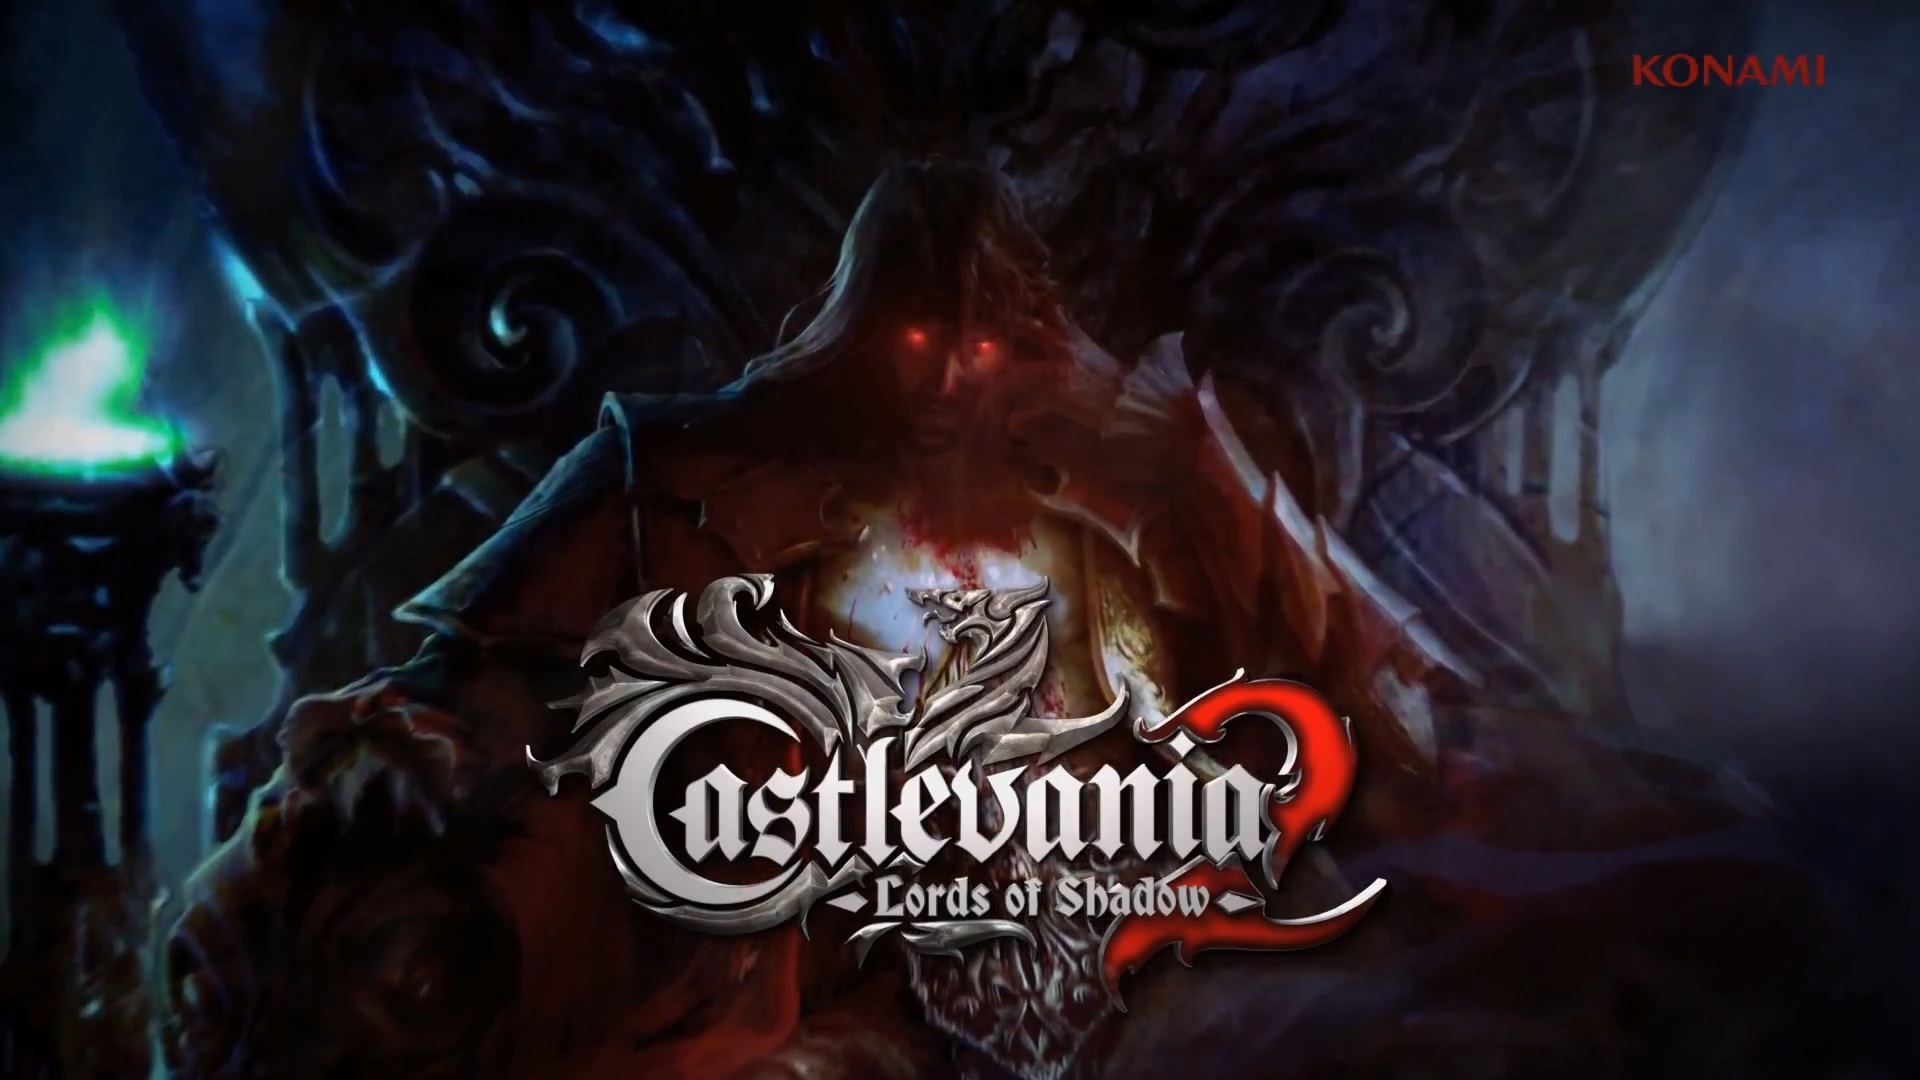 2012-VGA-Castlevania-Lords-of-Shadow-2-cinematic-trailer-rise-of-Dracul-Belmont.jpg